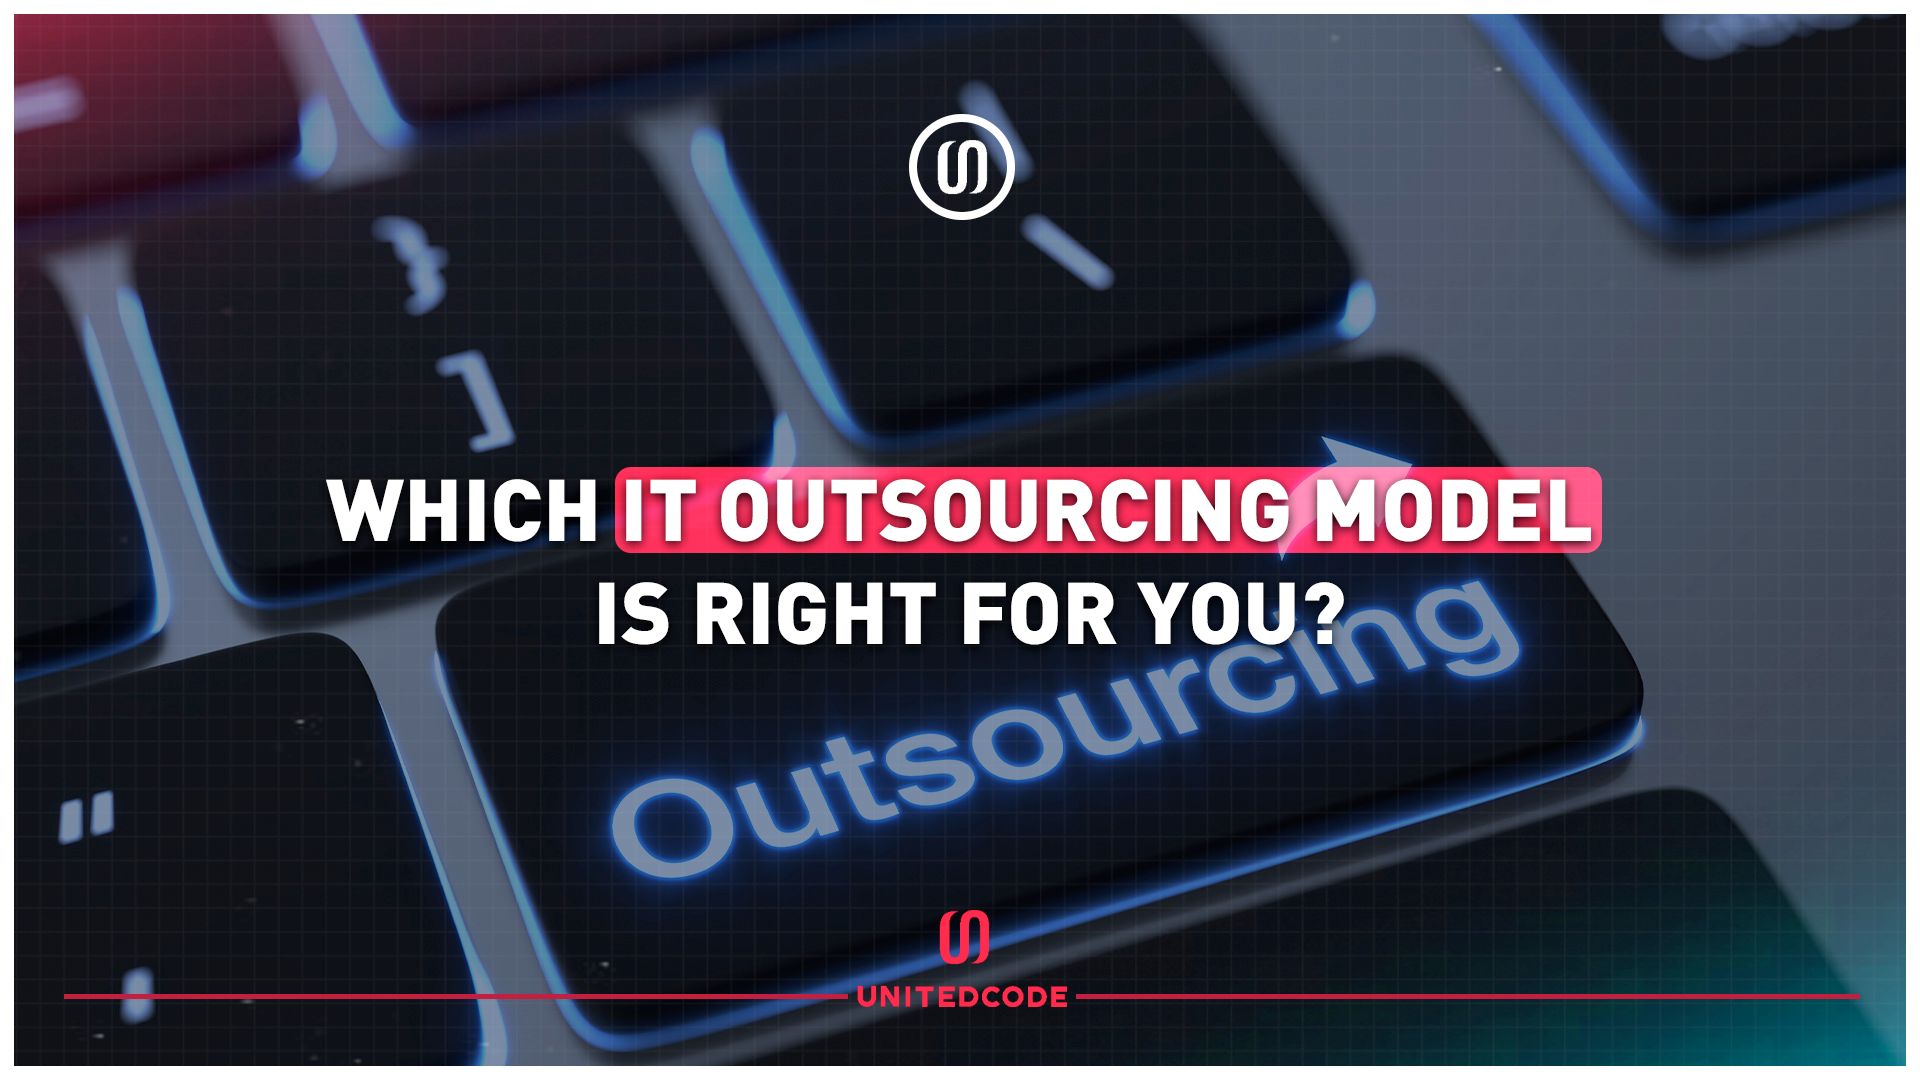 why is the service delivery company more advantageous than the rest of the outsourcing models?